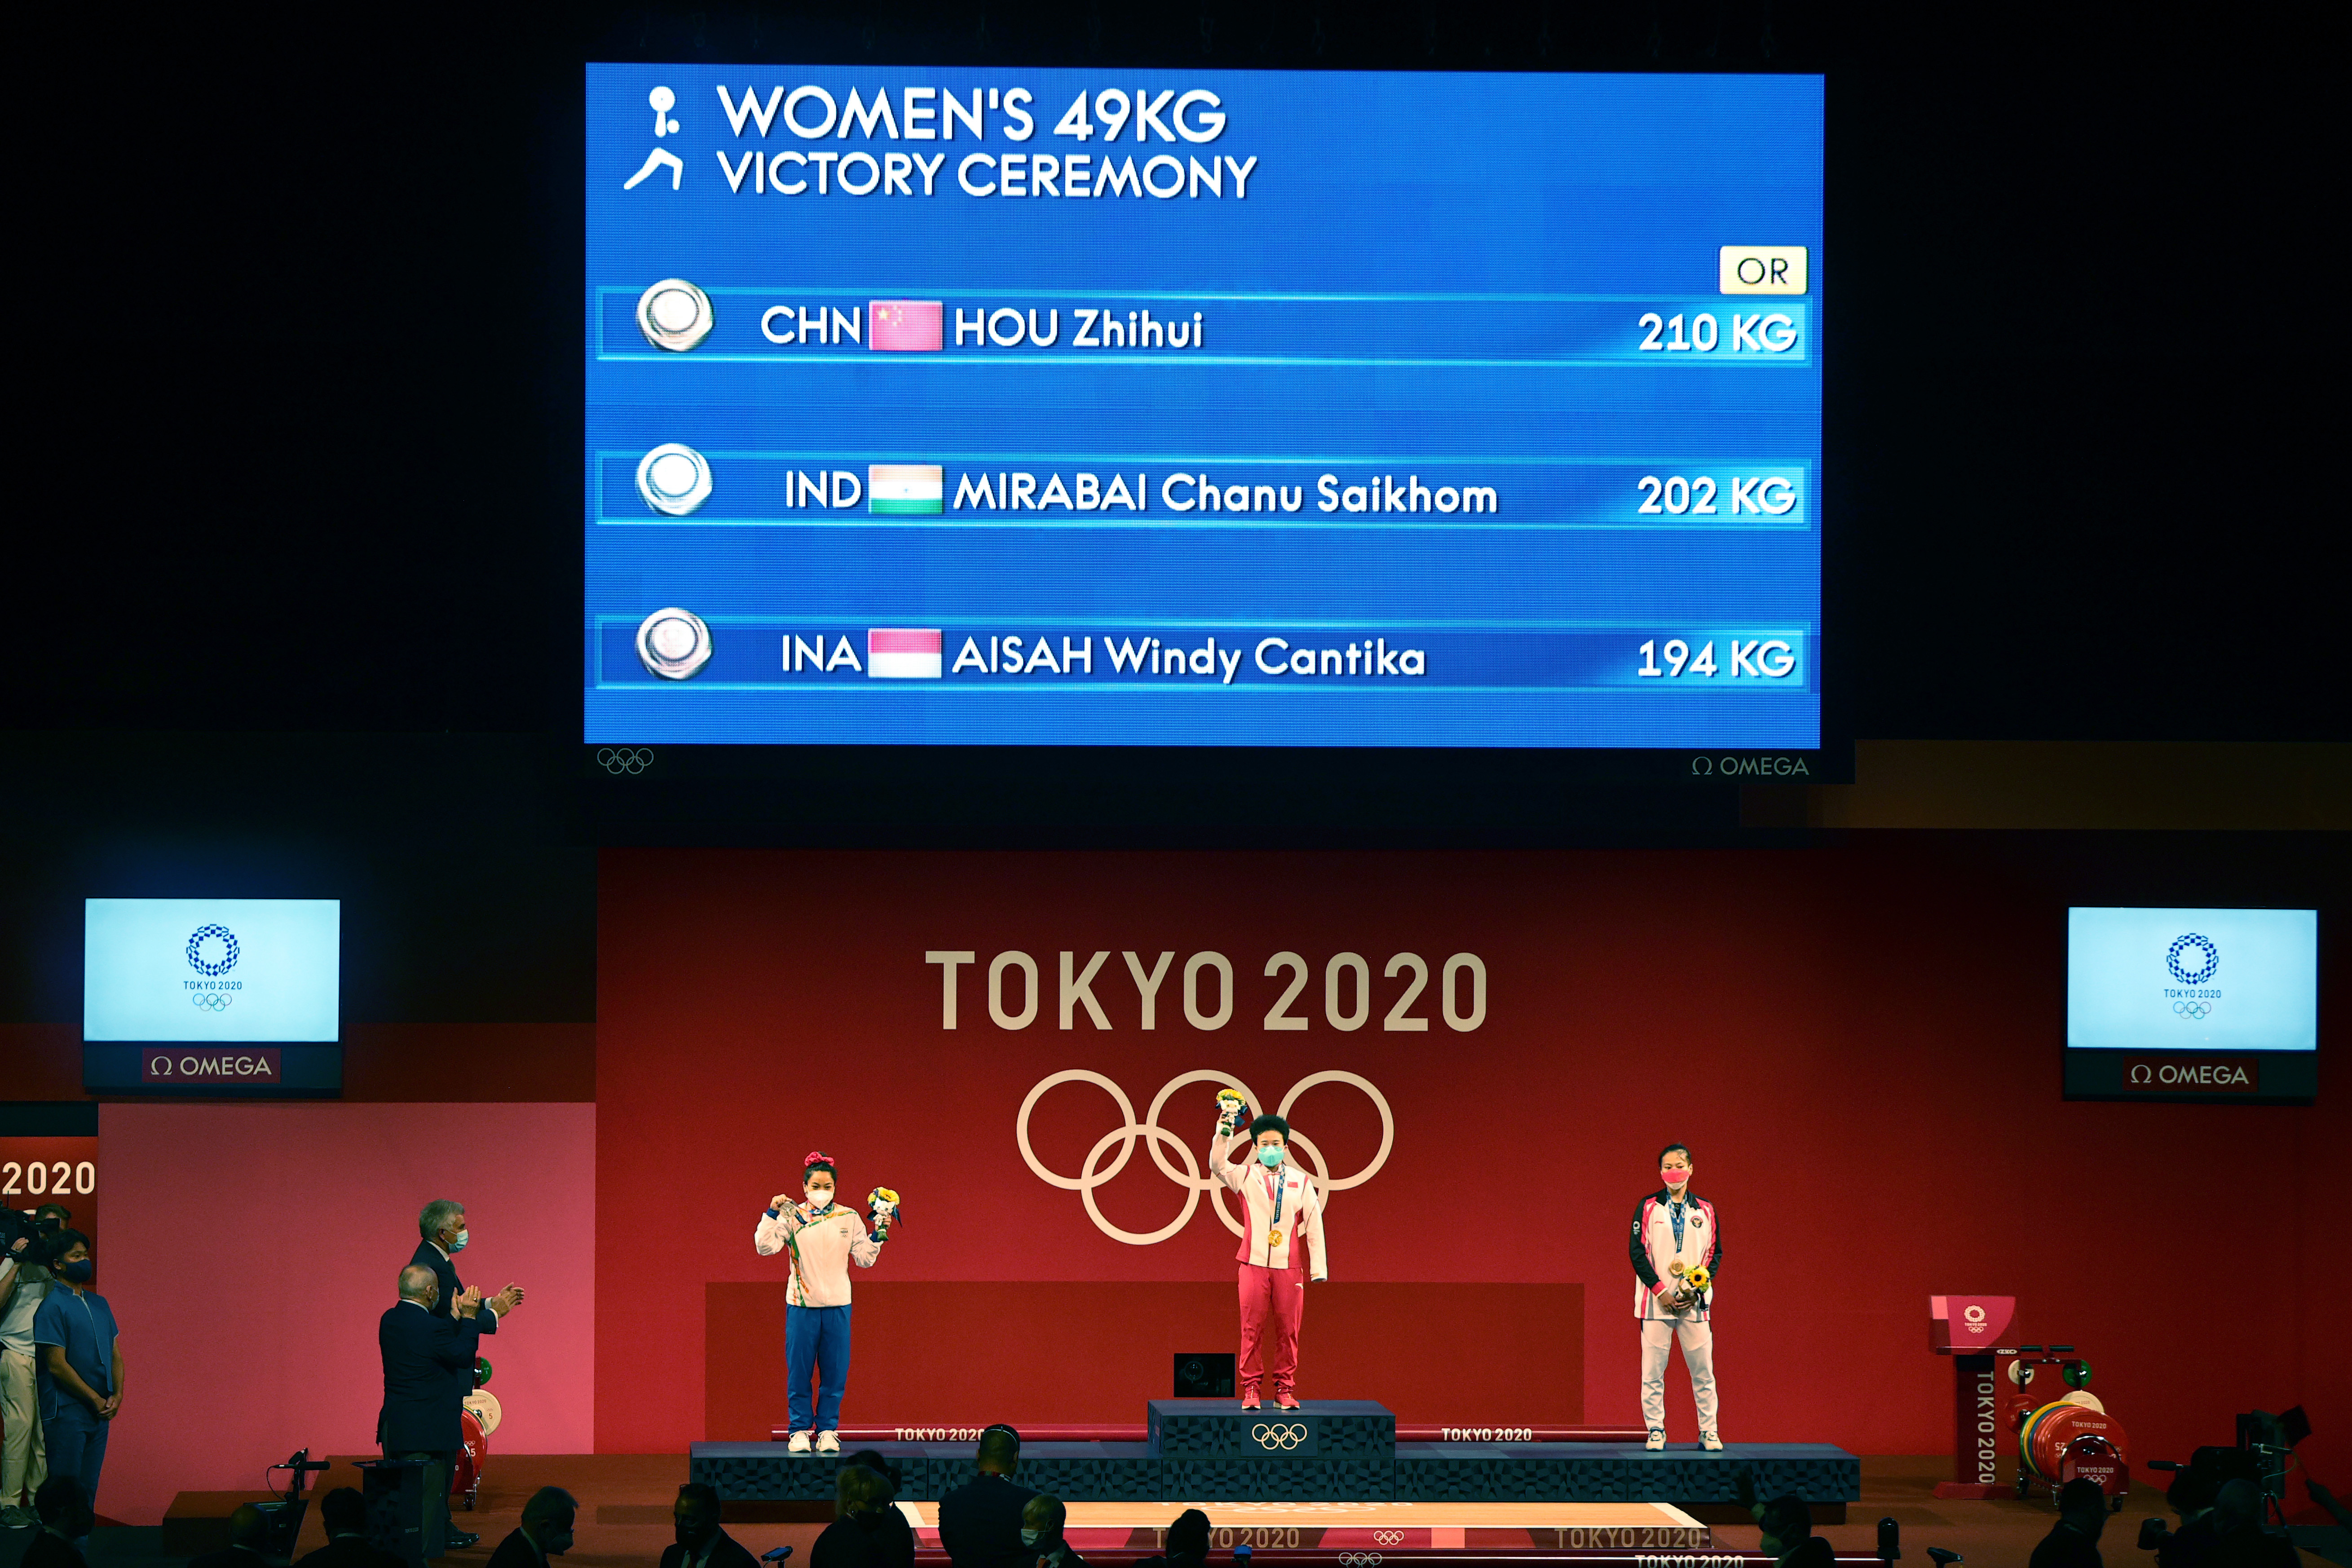 Weightlifter Mirabai Chanu (first from the left) flaunting her silver medal at the Olympic podium.